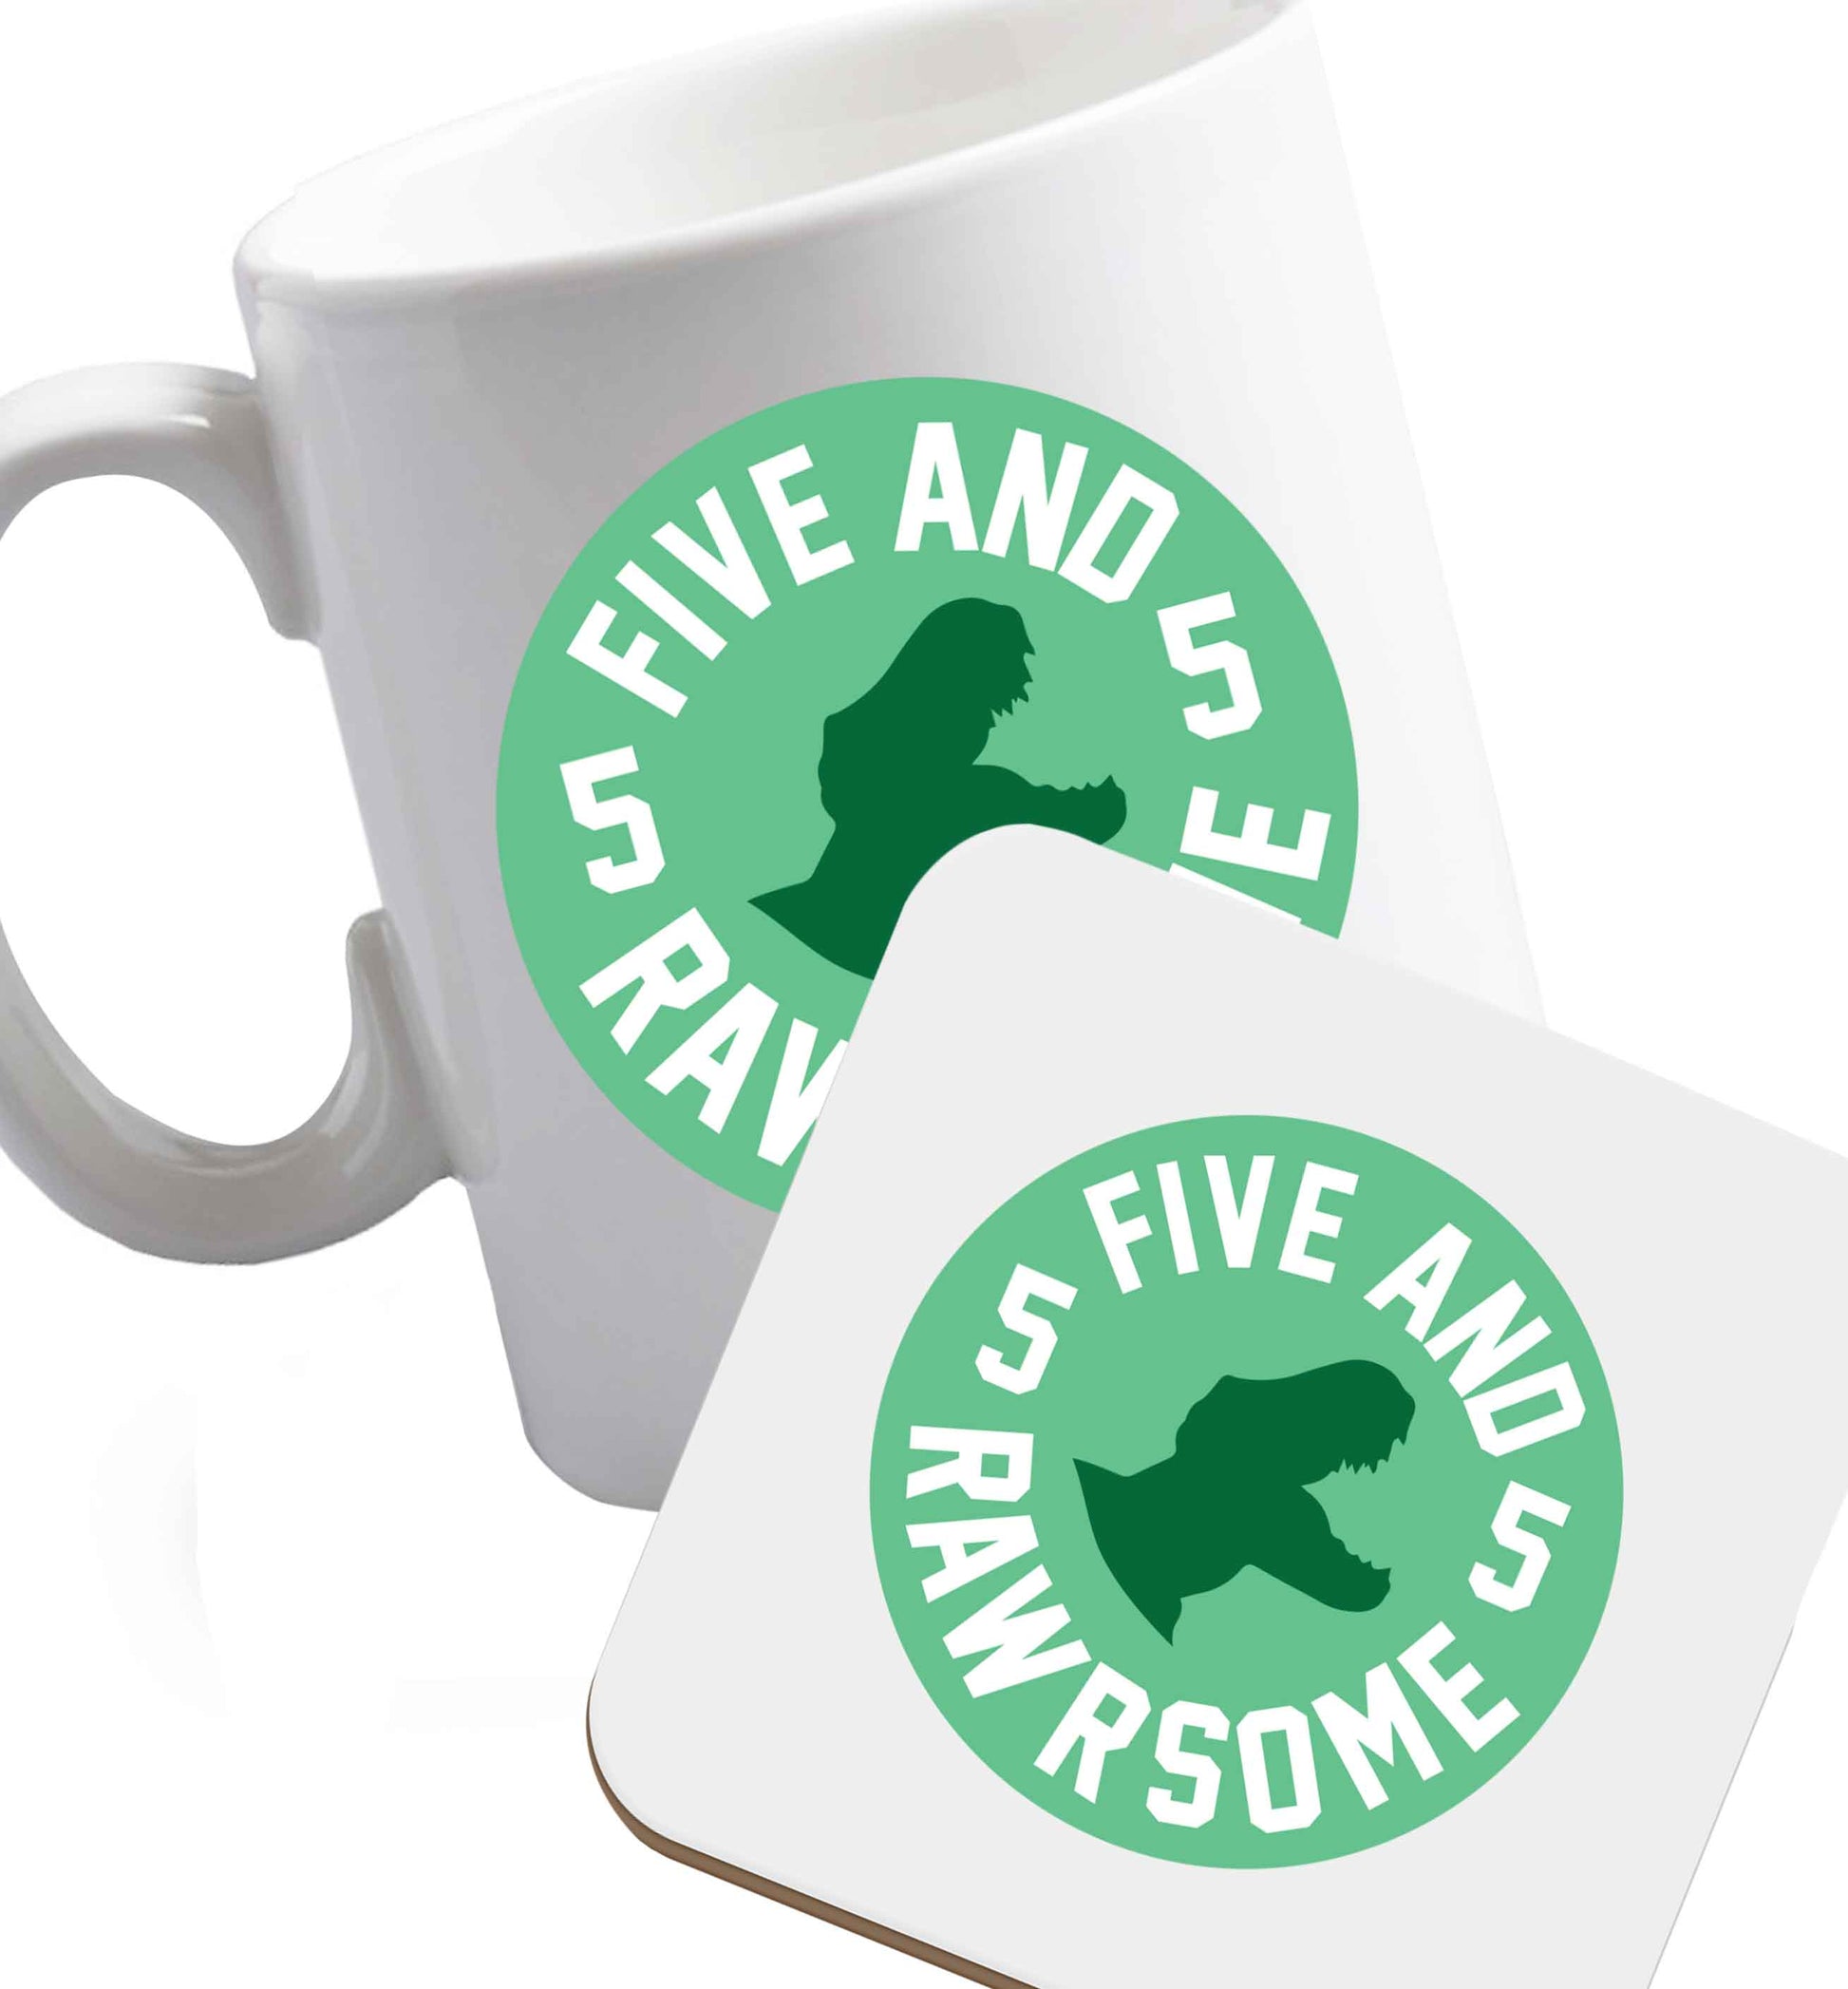 10 oz Five and rawrsome ceramic mug and coaster set right handed